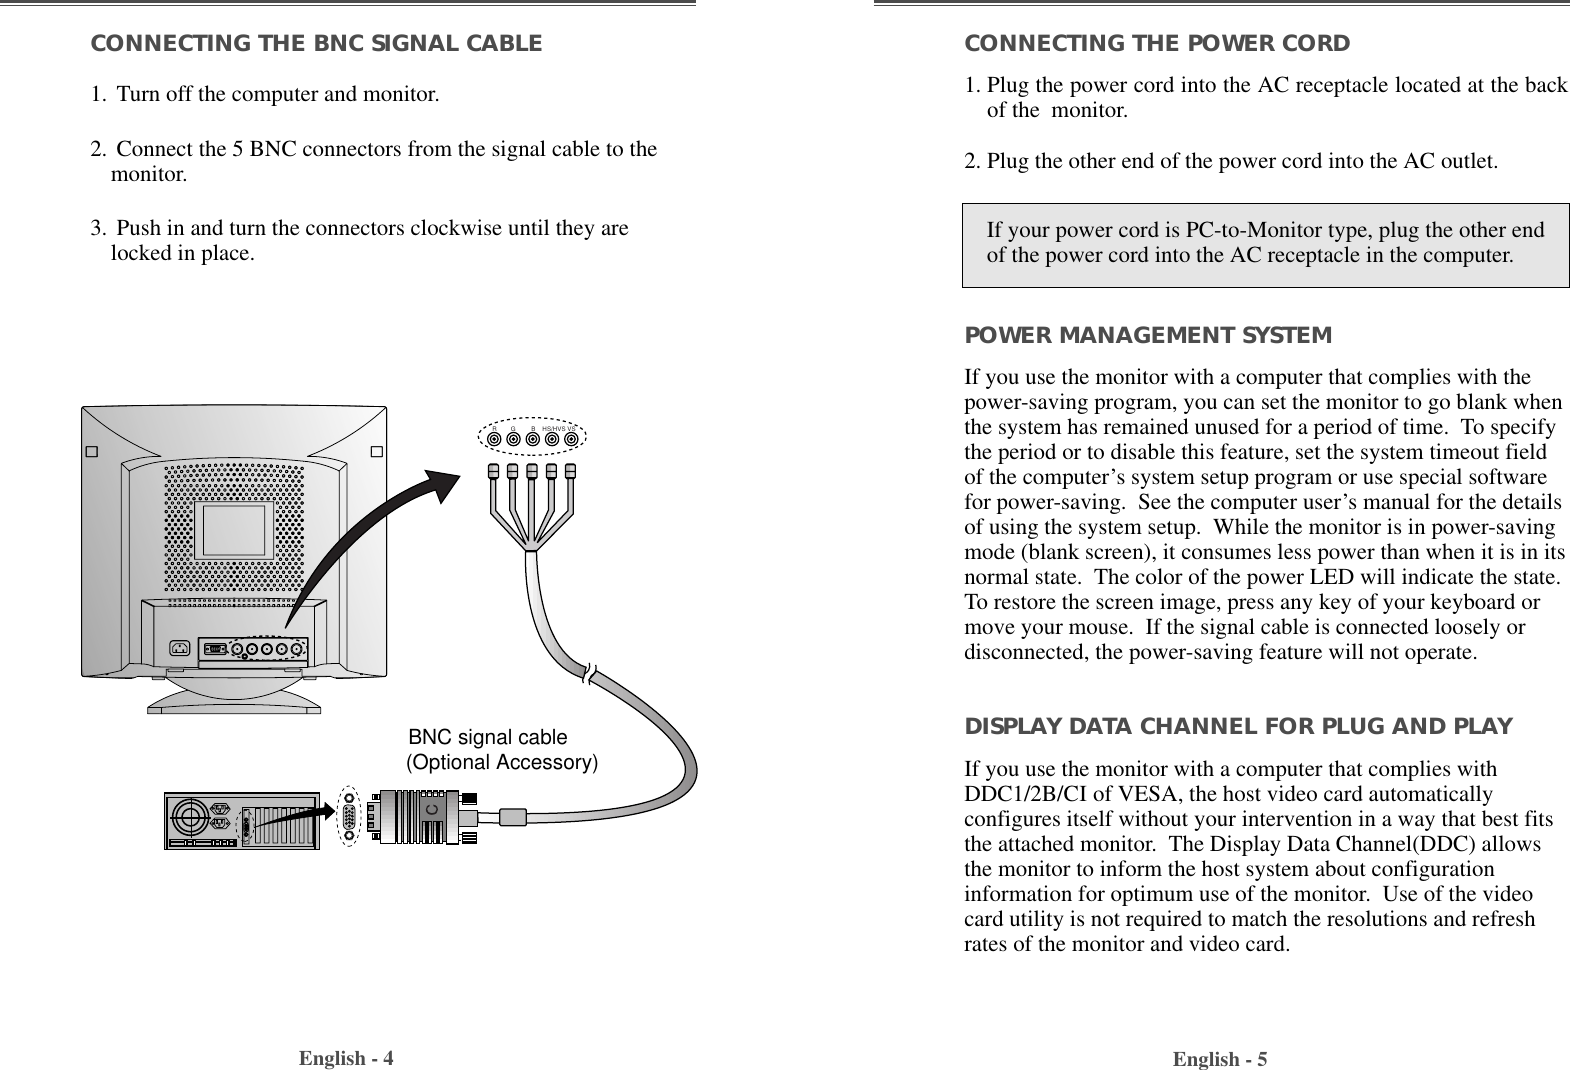 English - 4 English - 5CONNECTING THE POWER CORD1. Plug the power cord into the AC receptacle located at the backof the  monitor. 2. Plug the other end of the power cord into the AC outlet.POWER MANAGEMENT SYSTEMIf you use the monitor with a computer that complies with thepower-saving program, you can set the monitor to go blank whenthe system has remained unused for a period of time.  To specifythe period or to disable this feature, set the system timeout fieldof the computer’s system setup program or use special softwarefor power-saving.  See the computer user’s manual for the detailsof using the system setup.  While the monitor is in power-savingmode (blank screen), it consumes less power than when it is in itsnormal state.  The color of the power LED will indicate the state.To restore the screen image, press any key of your keyboard ormove your mouse.  If the signal cable is connected loosely ordisconnected, the power-saving feature will not operate.DISPLAY DATA CHANNEL FOR PLUG AND PLAYIf you use the monitor with a computer that complies withDDC1/2B/CI of VESA, the host video card automaticallyconfigures itself without your intervention in a way that best fitsthe attached monitor.  The Display Data Channel(DDC) allowsthe monitor to inform the host system about configurationinformation for optimum use of the monitor.  Use of the videocard utility is not required to match the resolutions and refreshrates of the monitor and video card.CONNECTING THE BNC SIGNAL CABLE1. Turn off the computer and monitor.2. Connect the 5 BNC connectors from the signal cable to themonitor. 3. Push in and turn the connectors clockwise until they arelocked in place. R        G         B    HS/HVS VS BNC signal cable   (Optional Accessory)If your power cord is PC-to-Monitor type, plug the other endof the power cord into the AC receptacle in the computer.